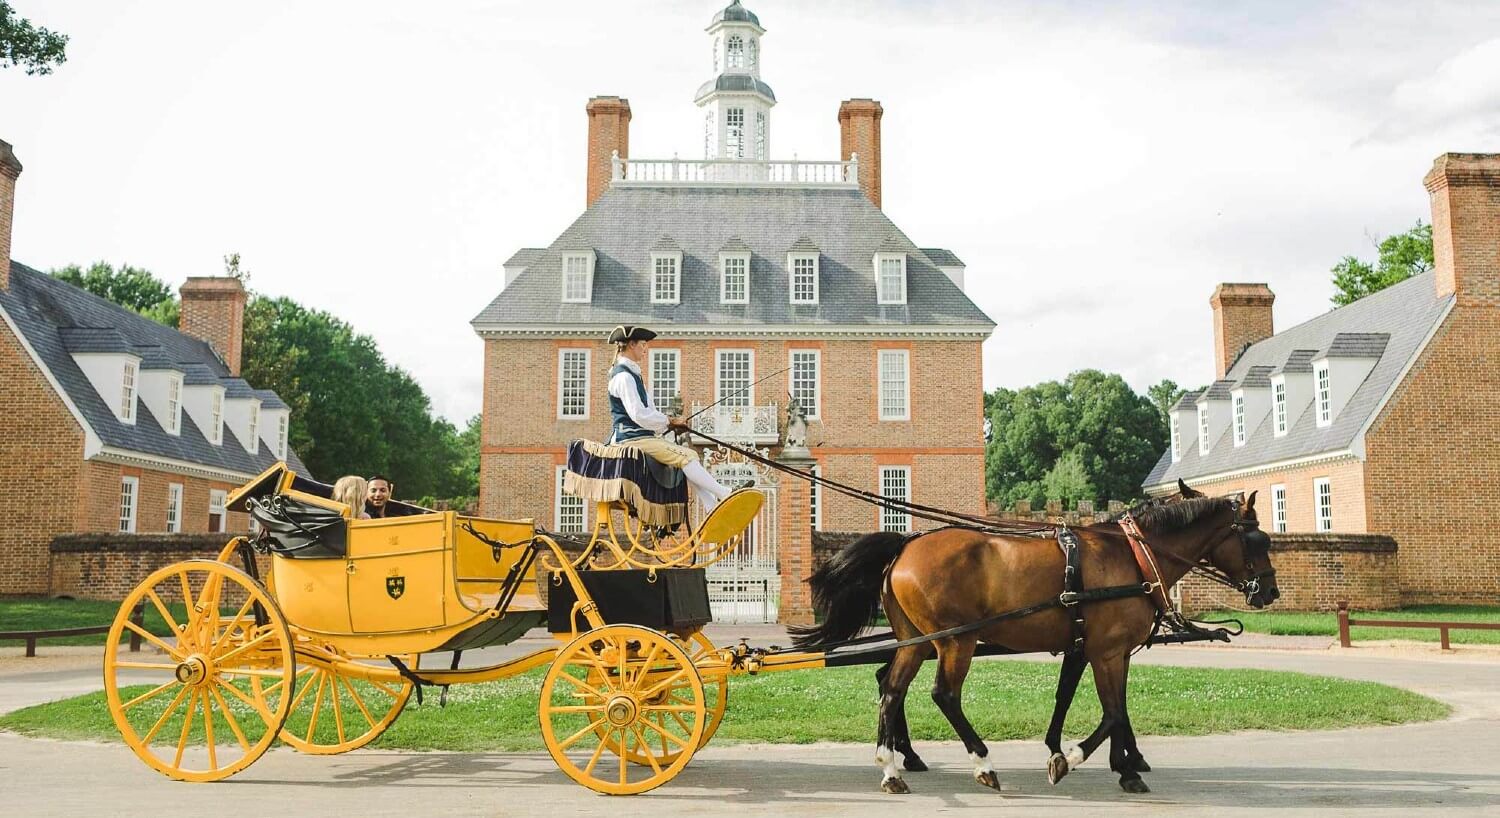 A woman in a yellow antique carriage being pulled by two horses in front of a Colonial estate.